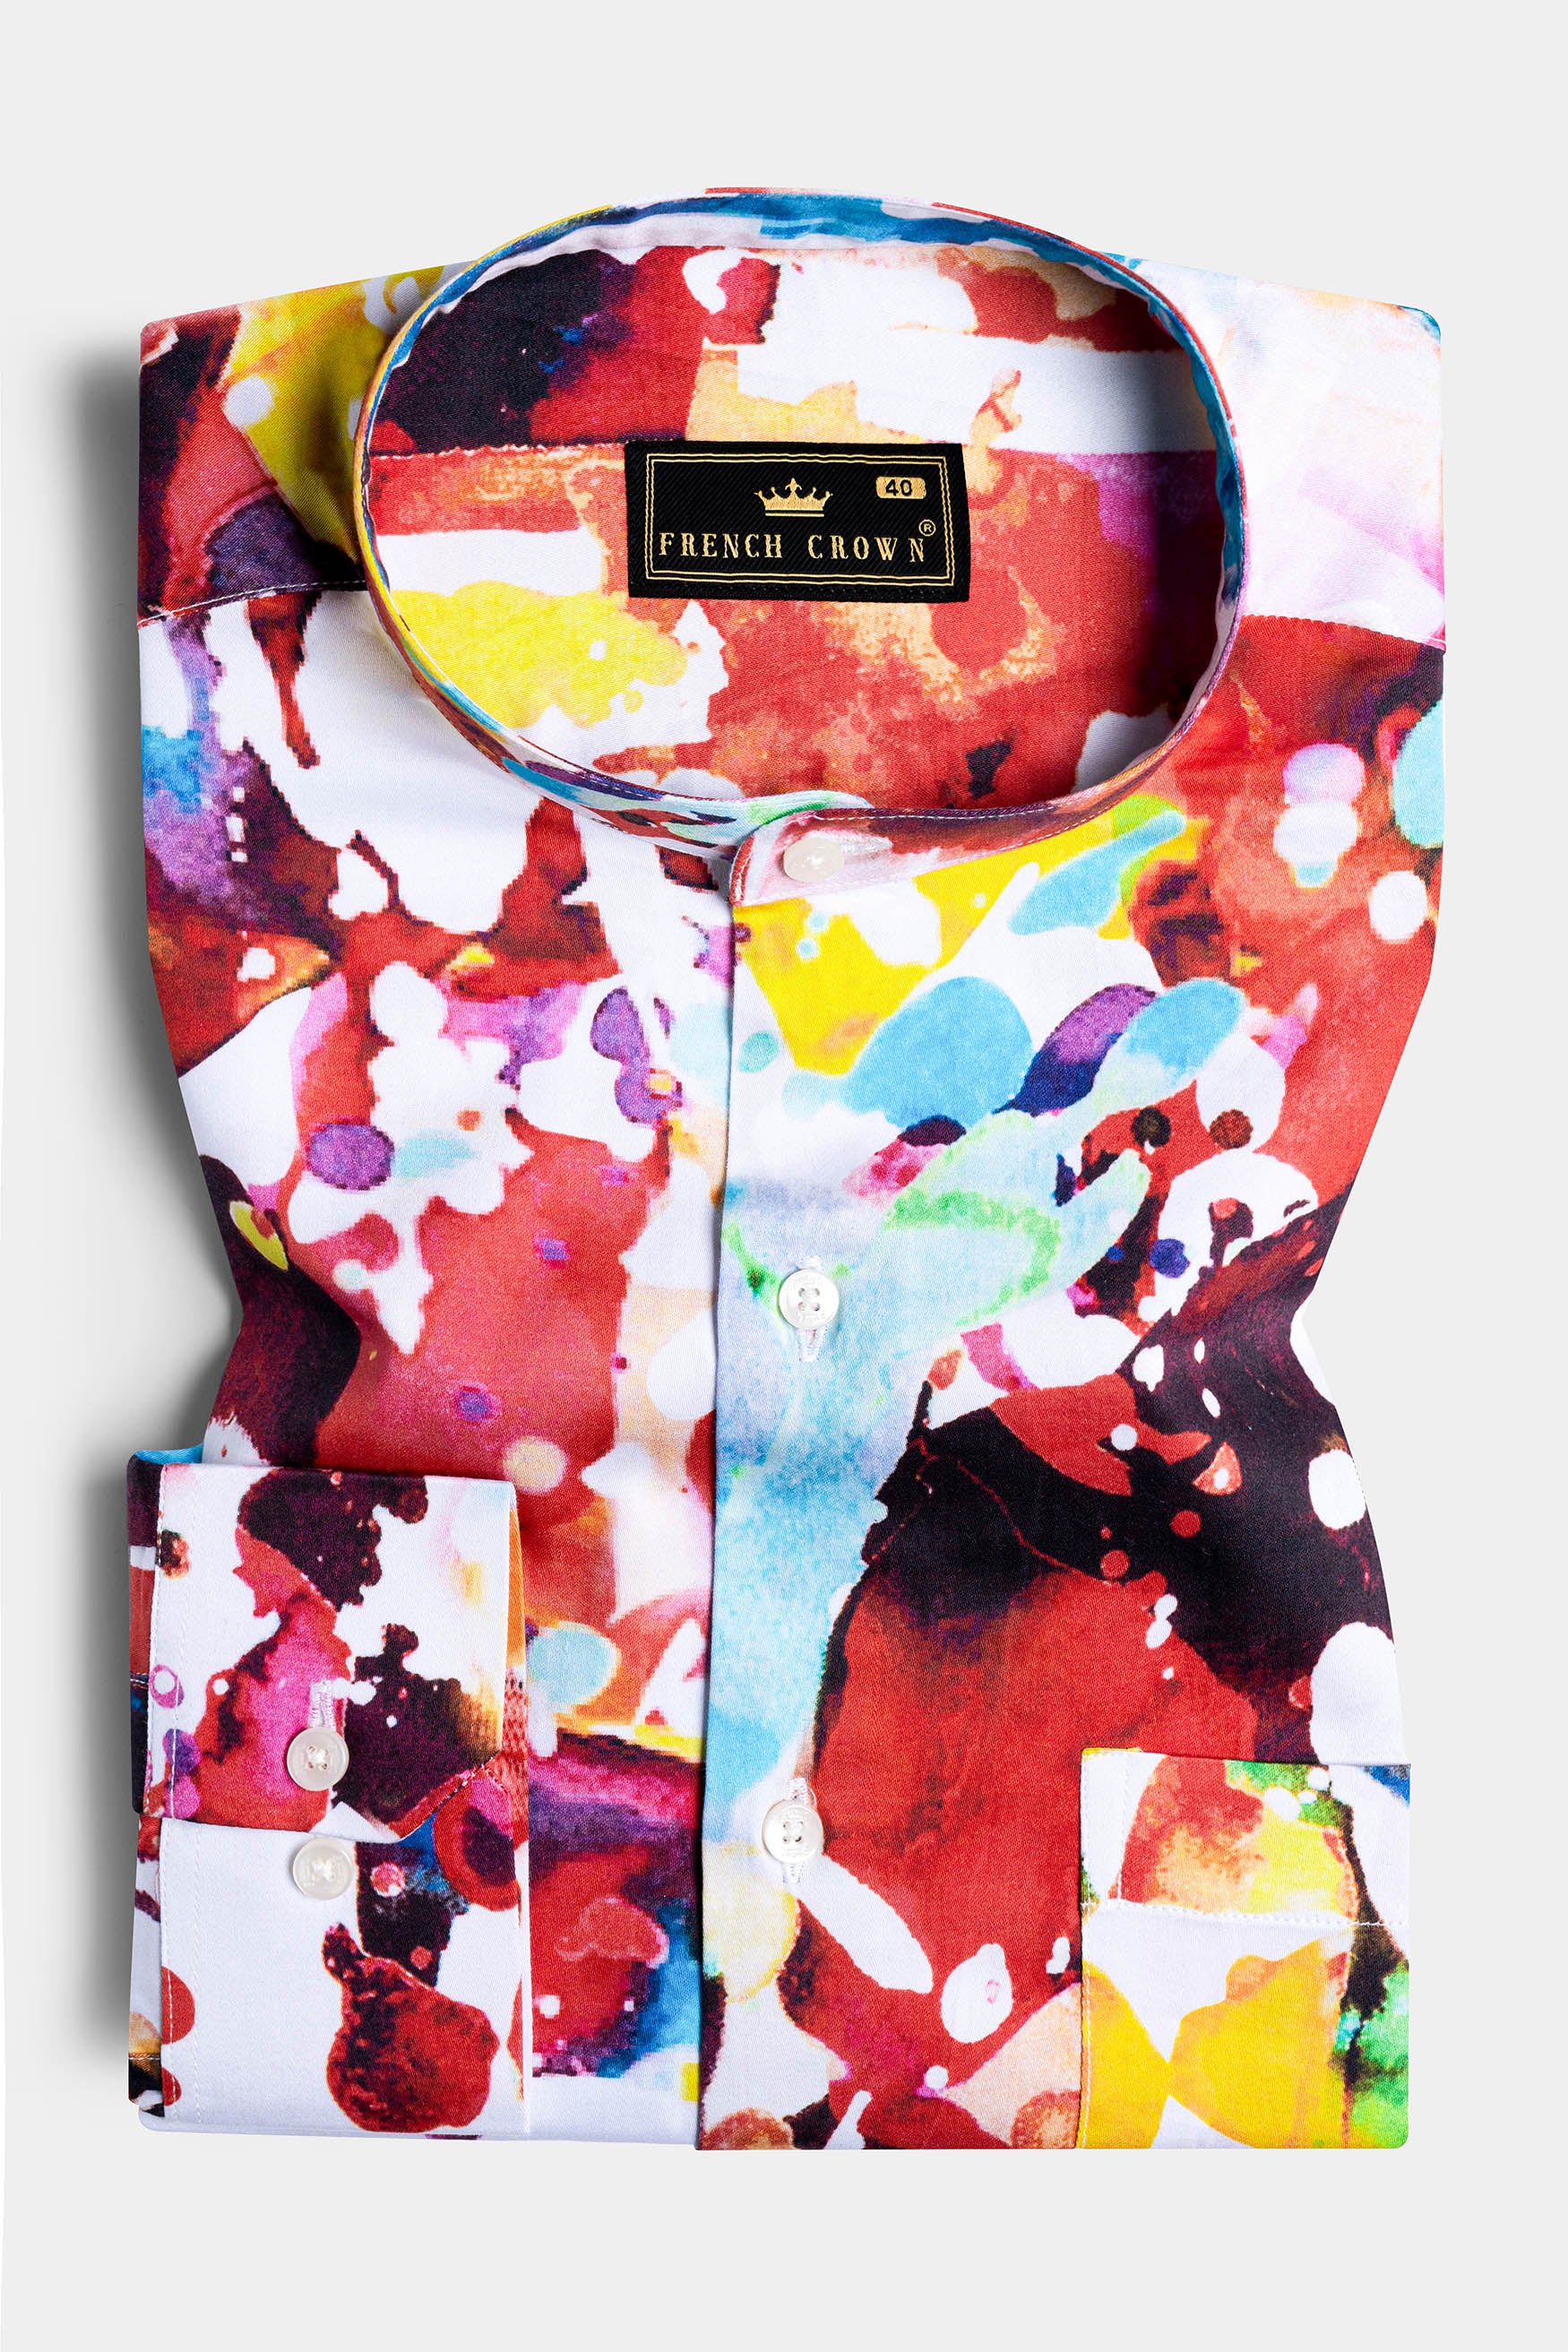 Bright White and Grapefruit Red Multicolour Water Splash Printed Subtle Sheen Super Soft Premium Cotton Designer Shirt 12183-M-38, 12183-M-H-38, 12183-M-39, 12183-M-H-39, 12183-M-40, 12183-M-H-40, 12183-M-42, 12183-M-H-42, 12183-M-44, 12183-M-H-44, 12183-M-46, 12183-M-H-46, 12183-M-48, 12183-M-H-48, 12183-M-50, 12183-M-H-50, 12183-M-52, 12183-M-H-52